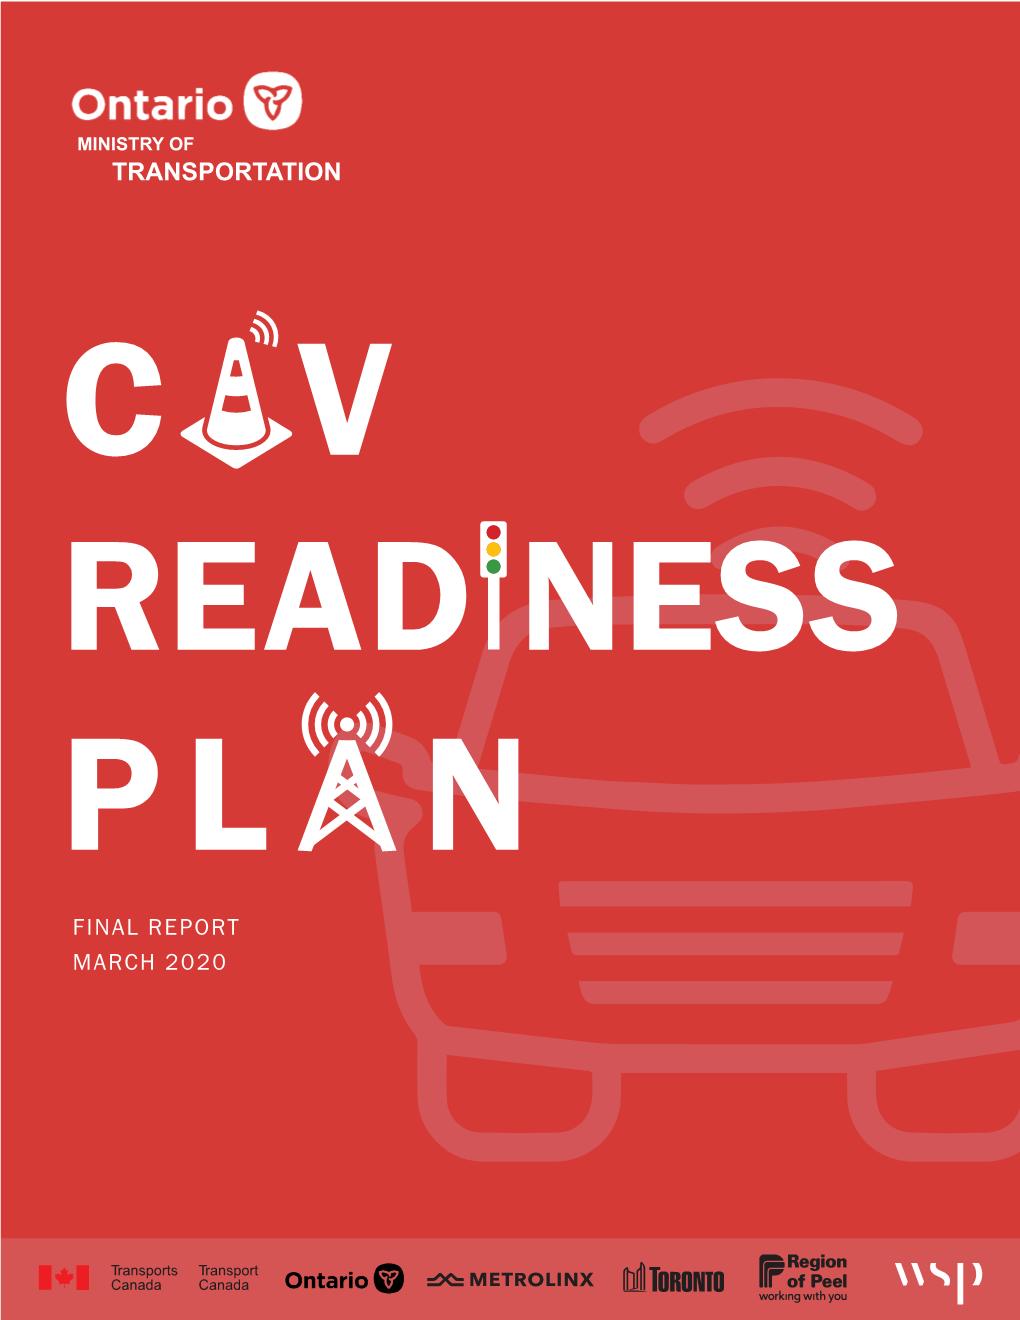 CAV Readiness Plan Was Developed Through Collective Input from a Steering Committee and a Variety of Public Agency Stakeholders